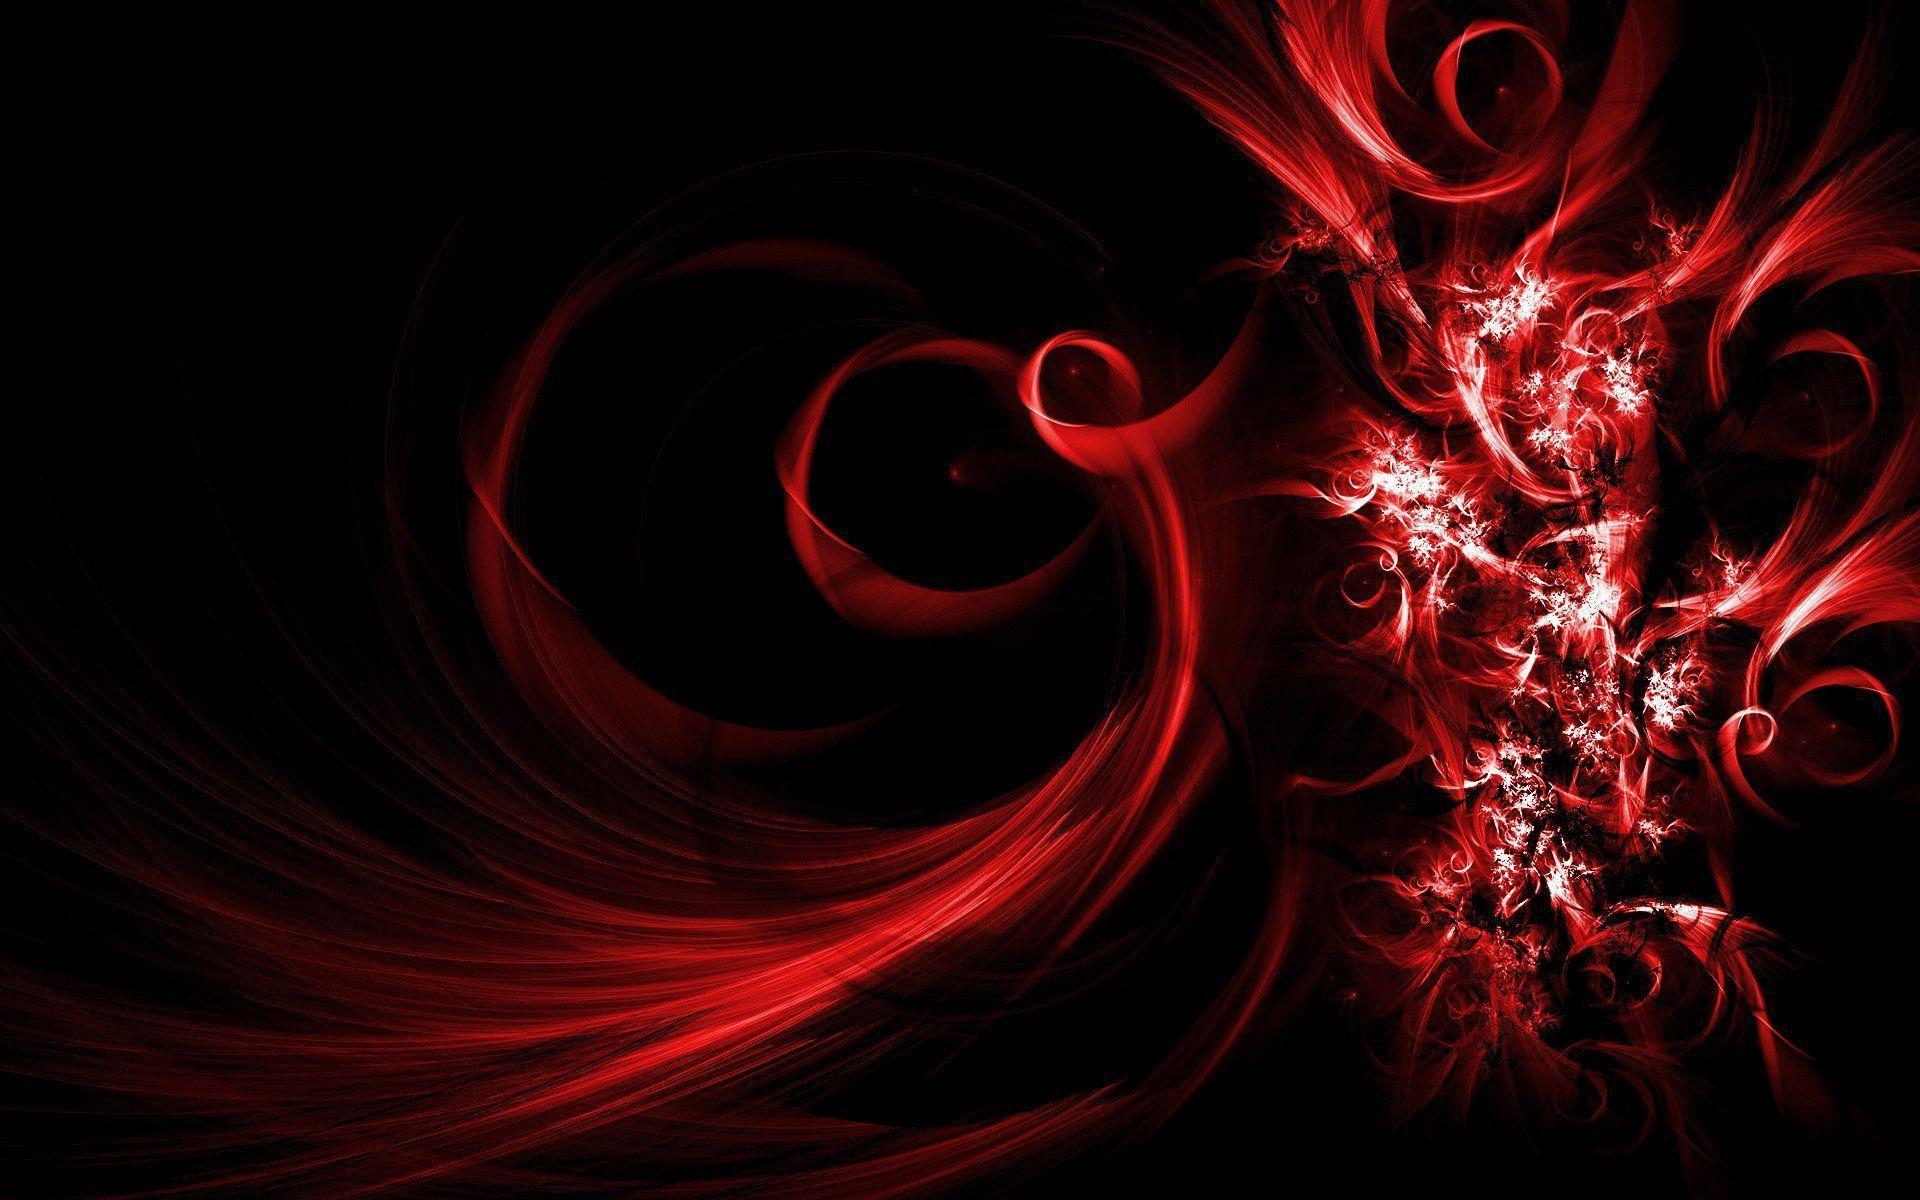 Black And Red Abstract Wallpaper HD 1080P 12 HD Wallpaper